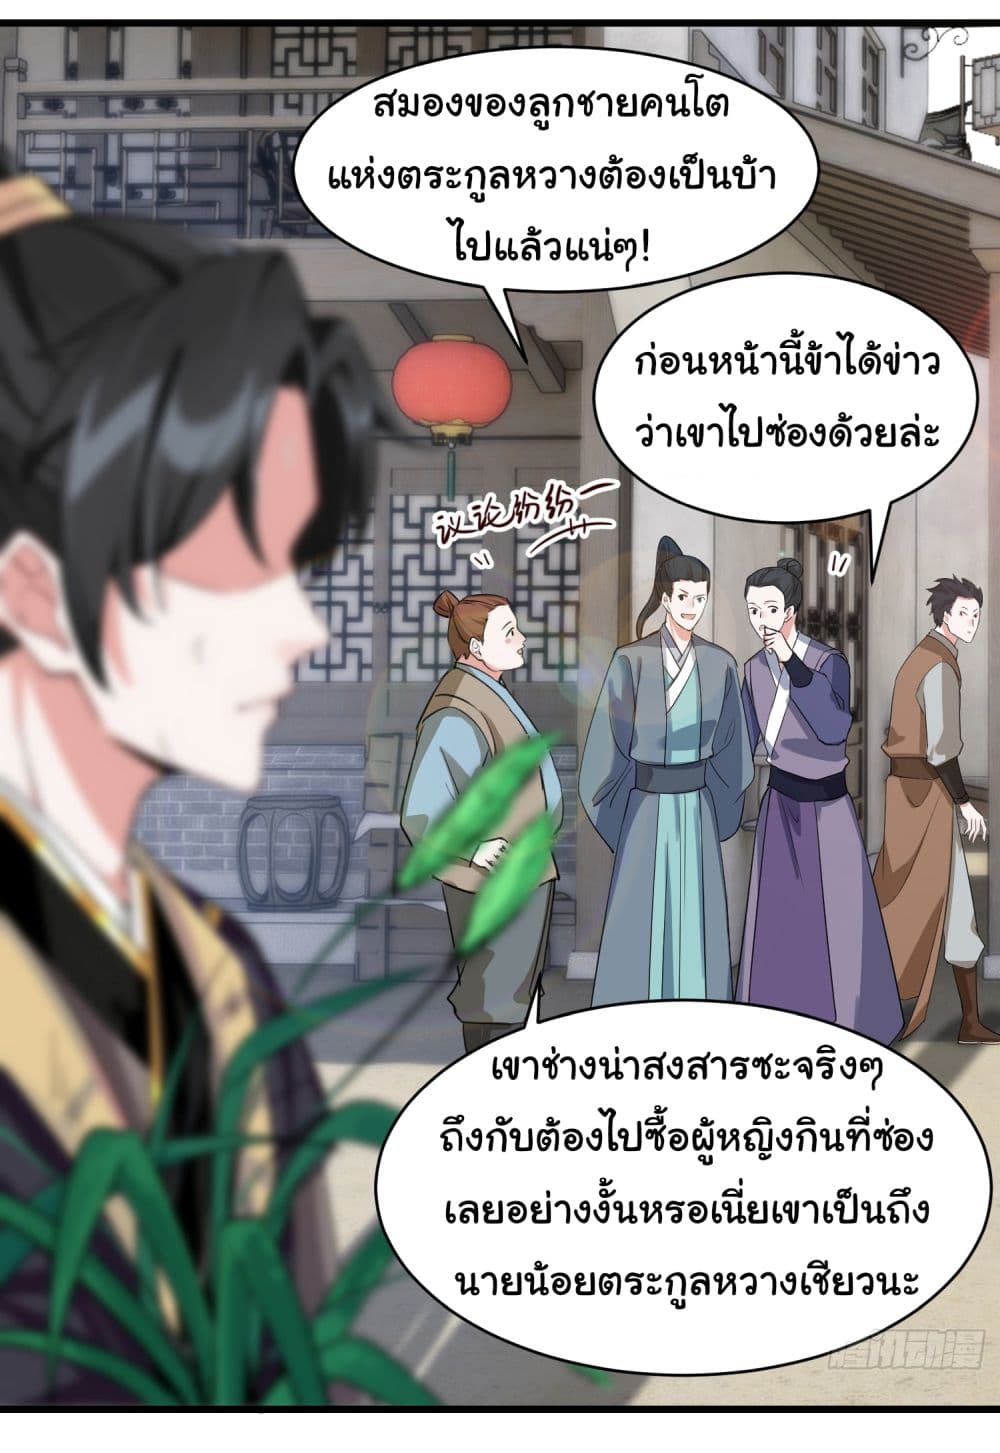 Rebirth of an Immortal Cultivator from 10,000 years ago ตอนที่ 2 (14)